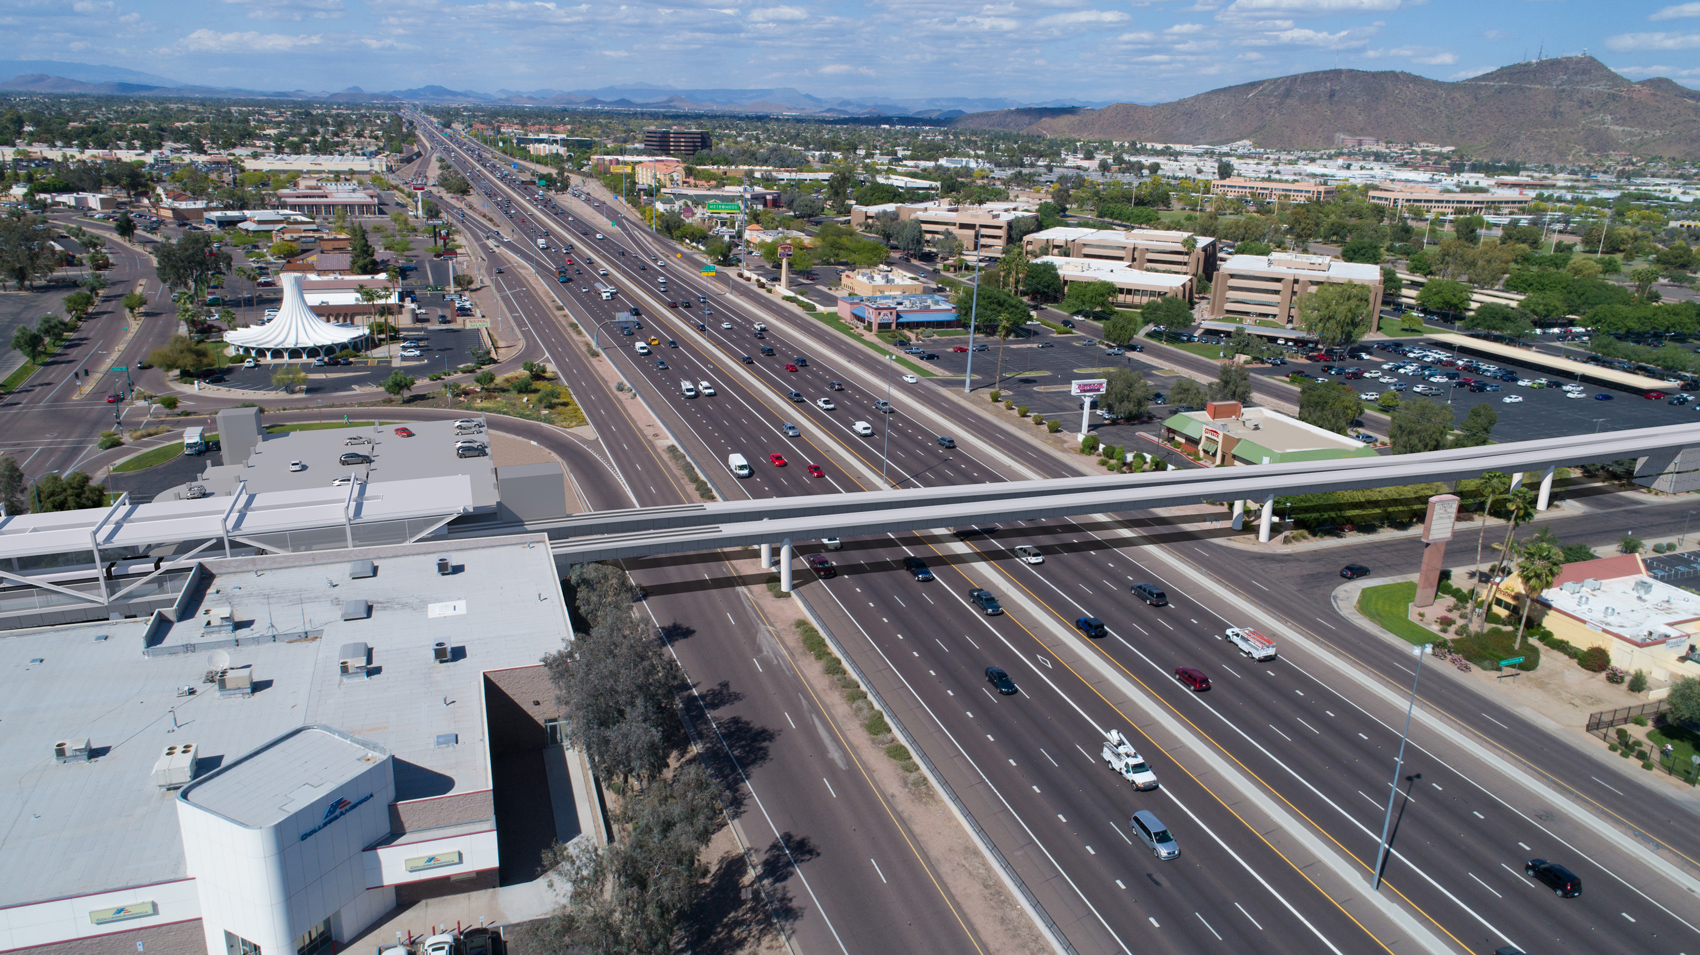 The photo simulation shows the future I-17 light rail bridge (looking northeast) crossing I-17 at the Mountain View Rd. alignment.